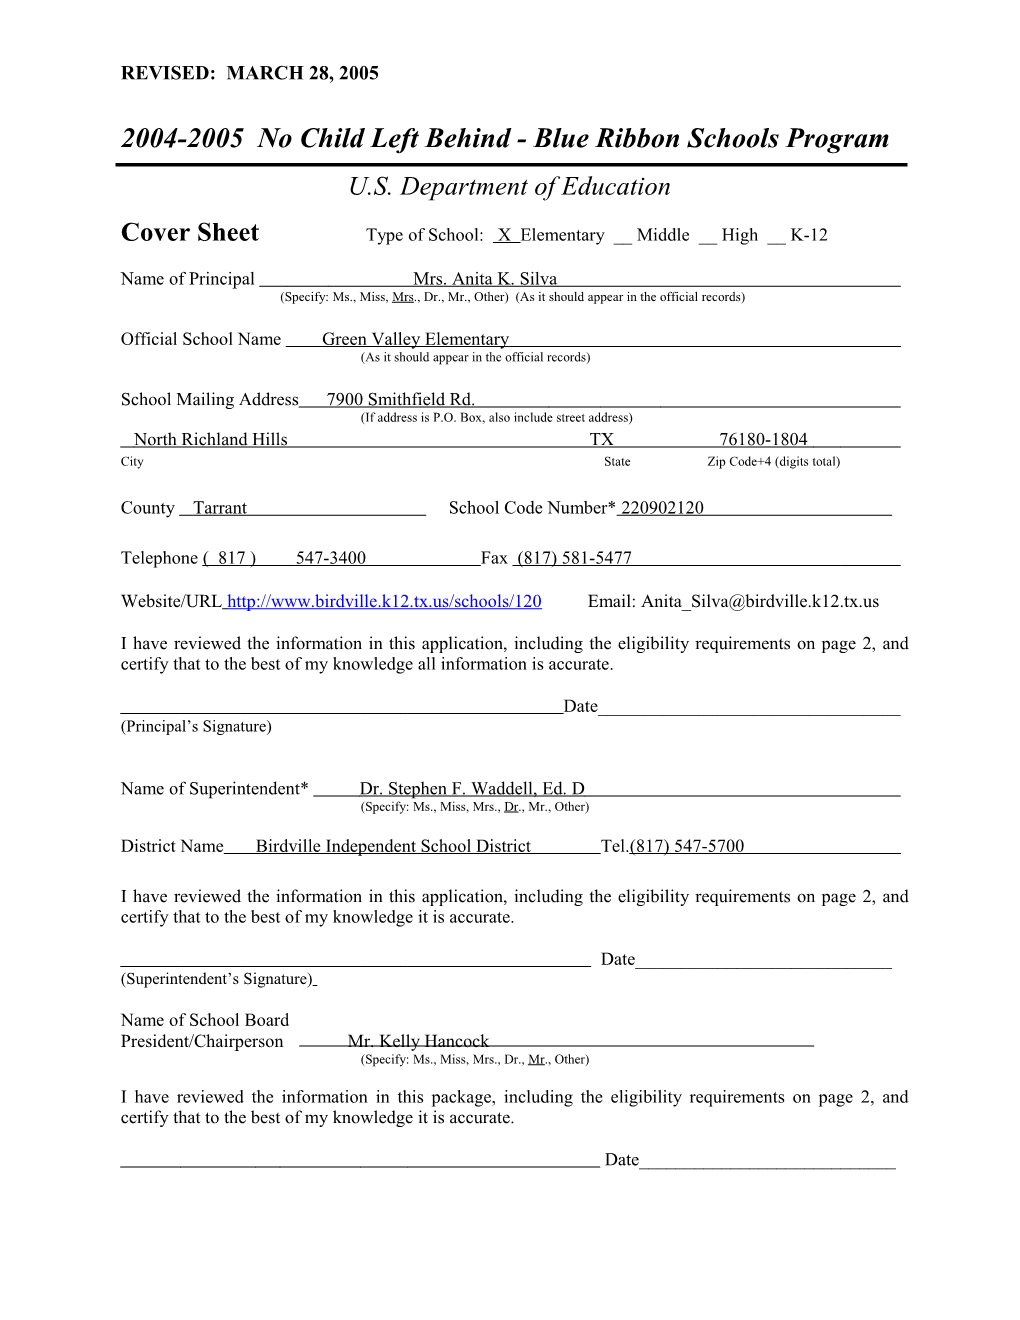 Green Valley Elementary School Application: 2004-2005, No Child Left Behind - Blue Ribbon